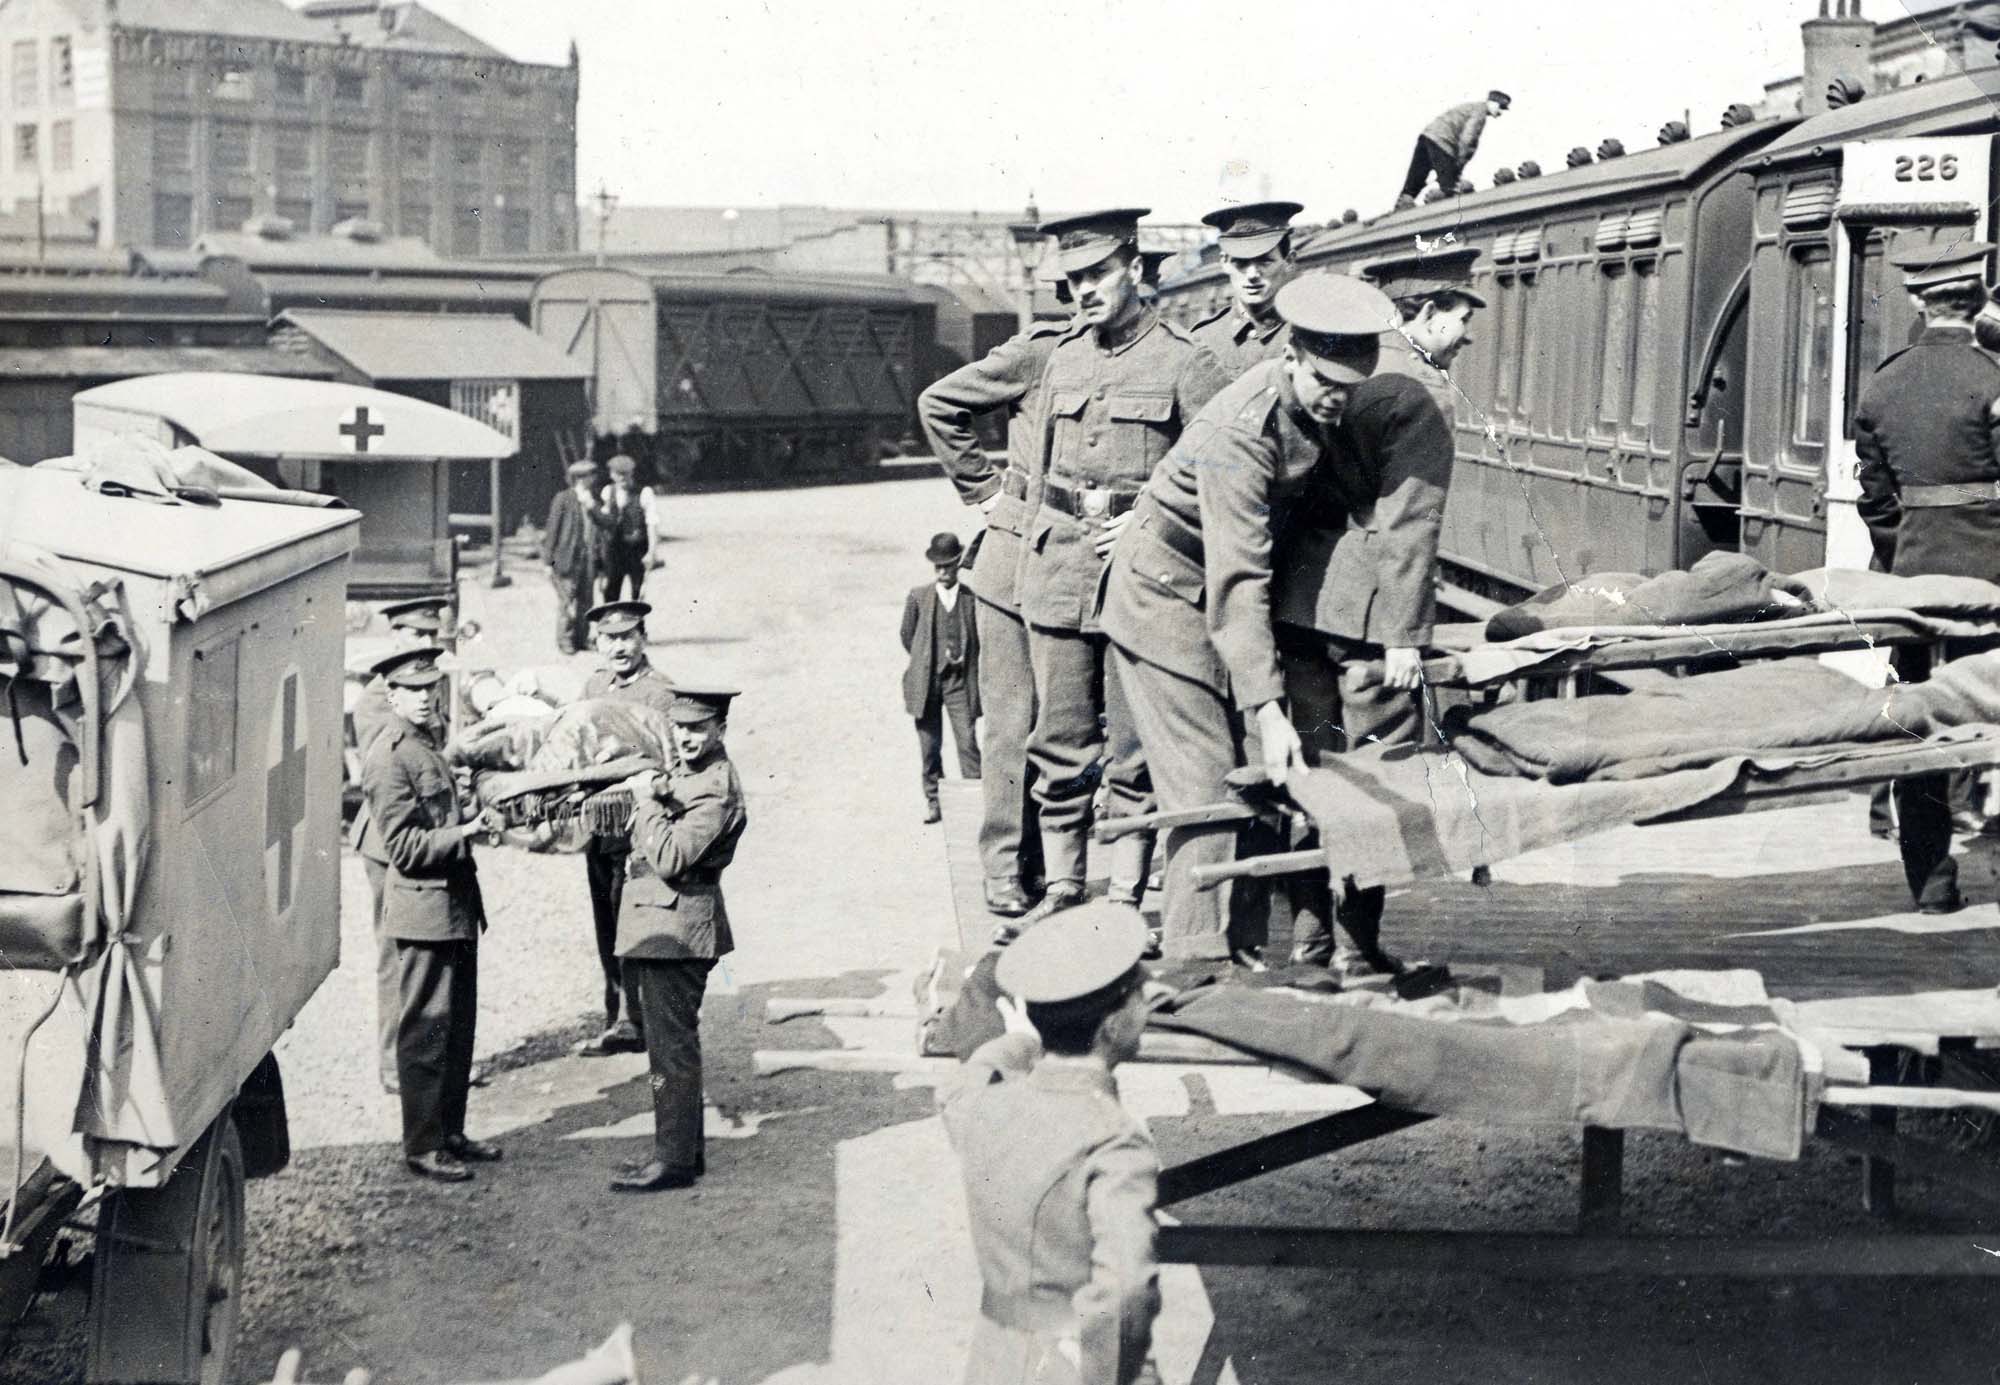 Loading the wounded into ambulances at Leicester Railway Station - Leicester Mercury Archive at the University of Leicester